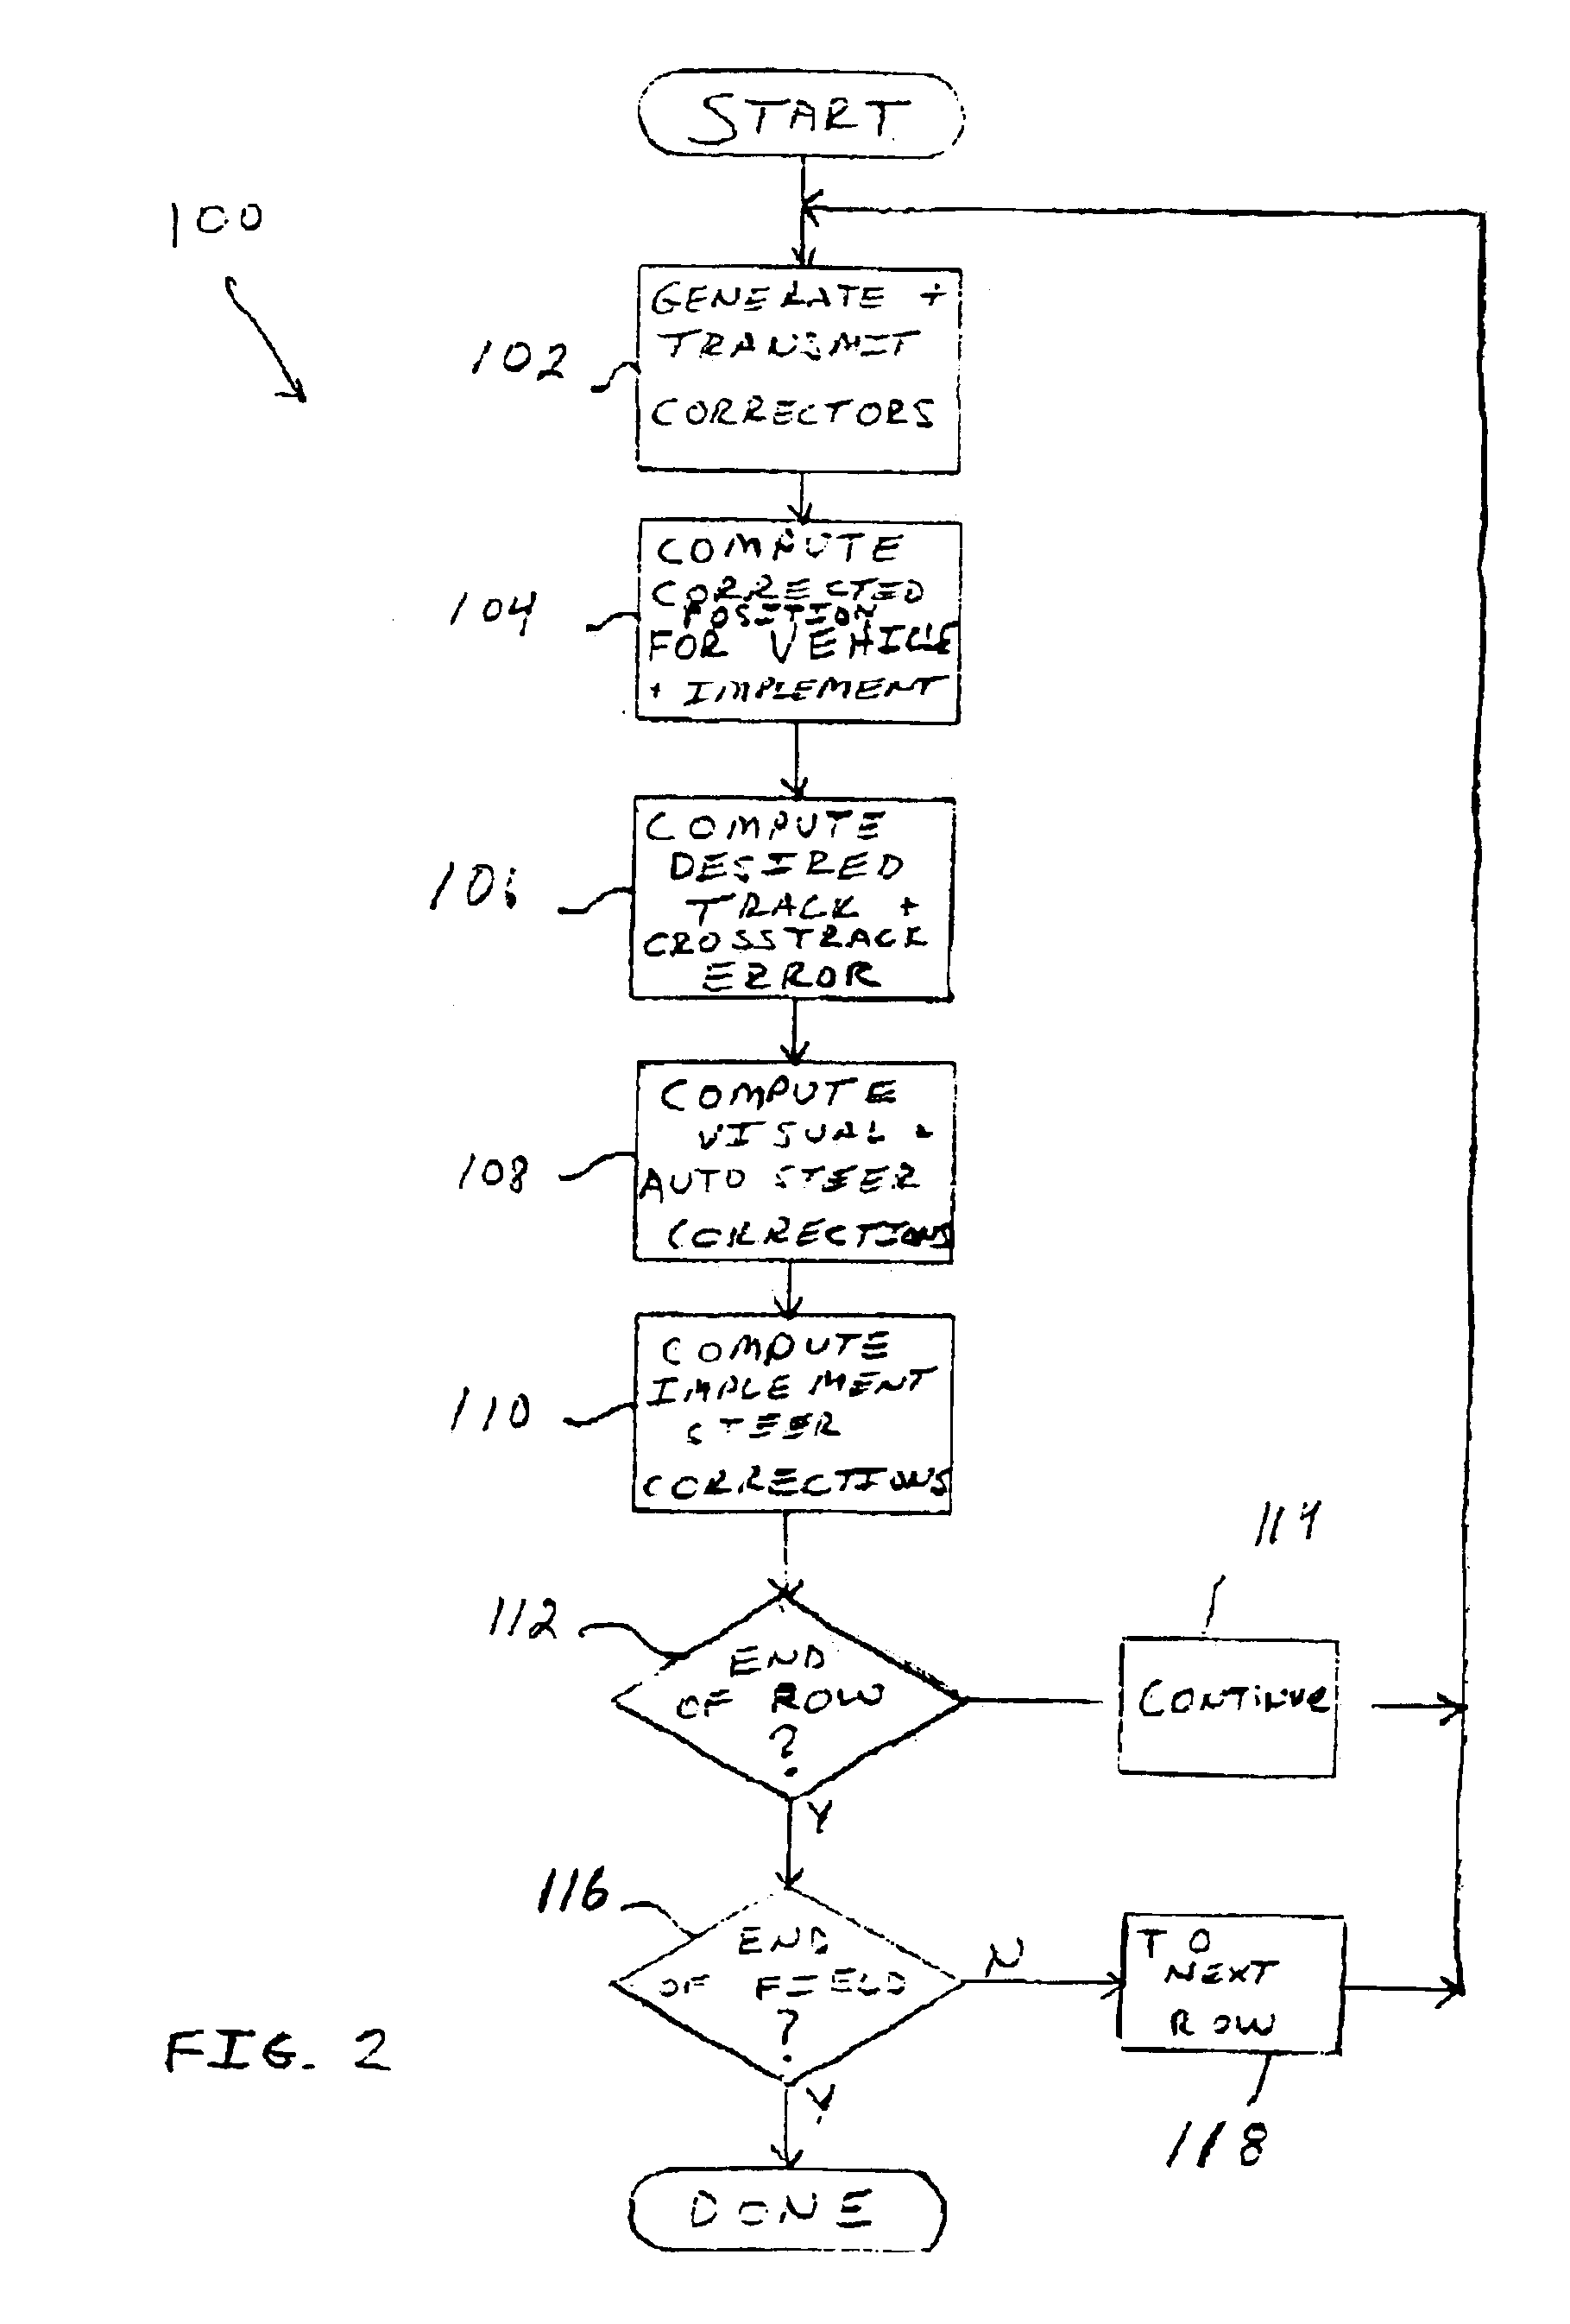 Method and system for implement steering for agricultural vehicles